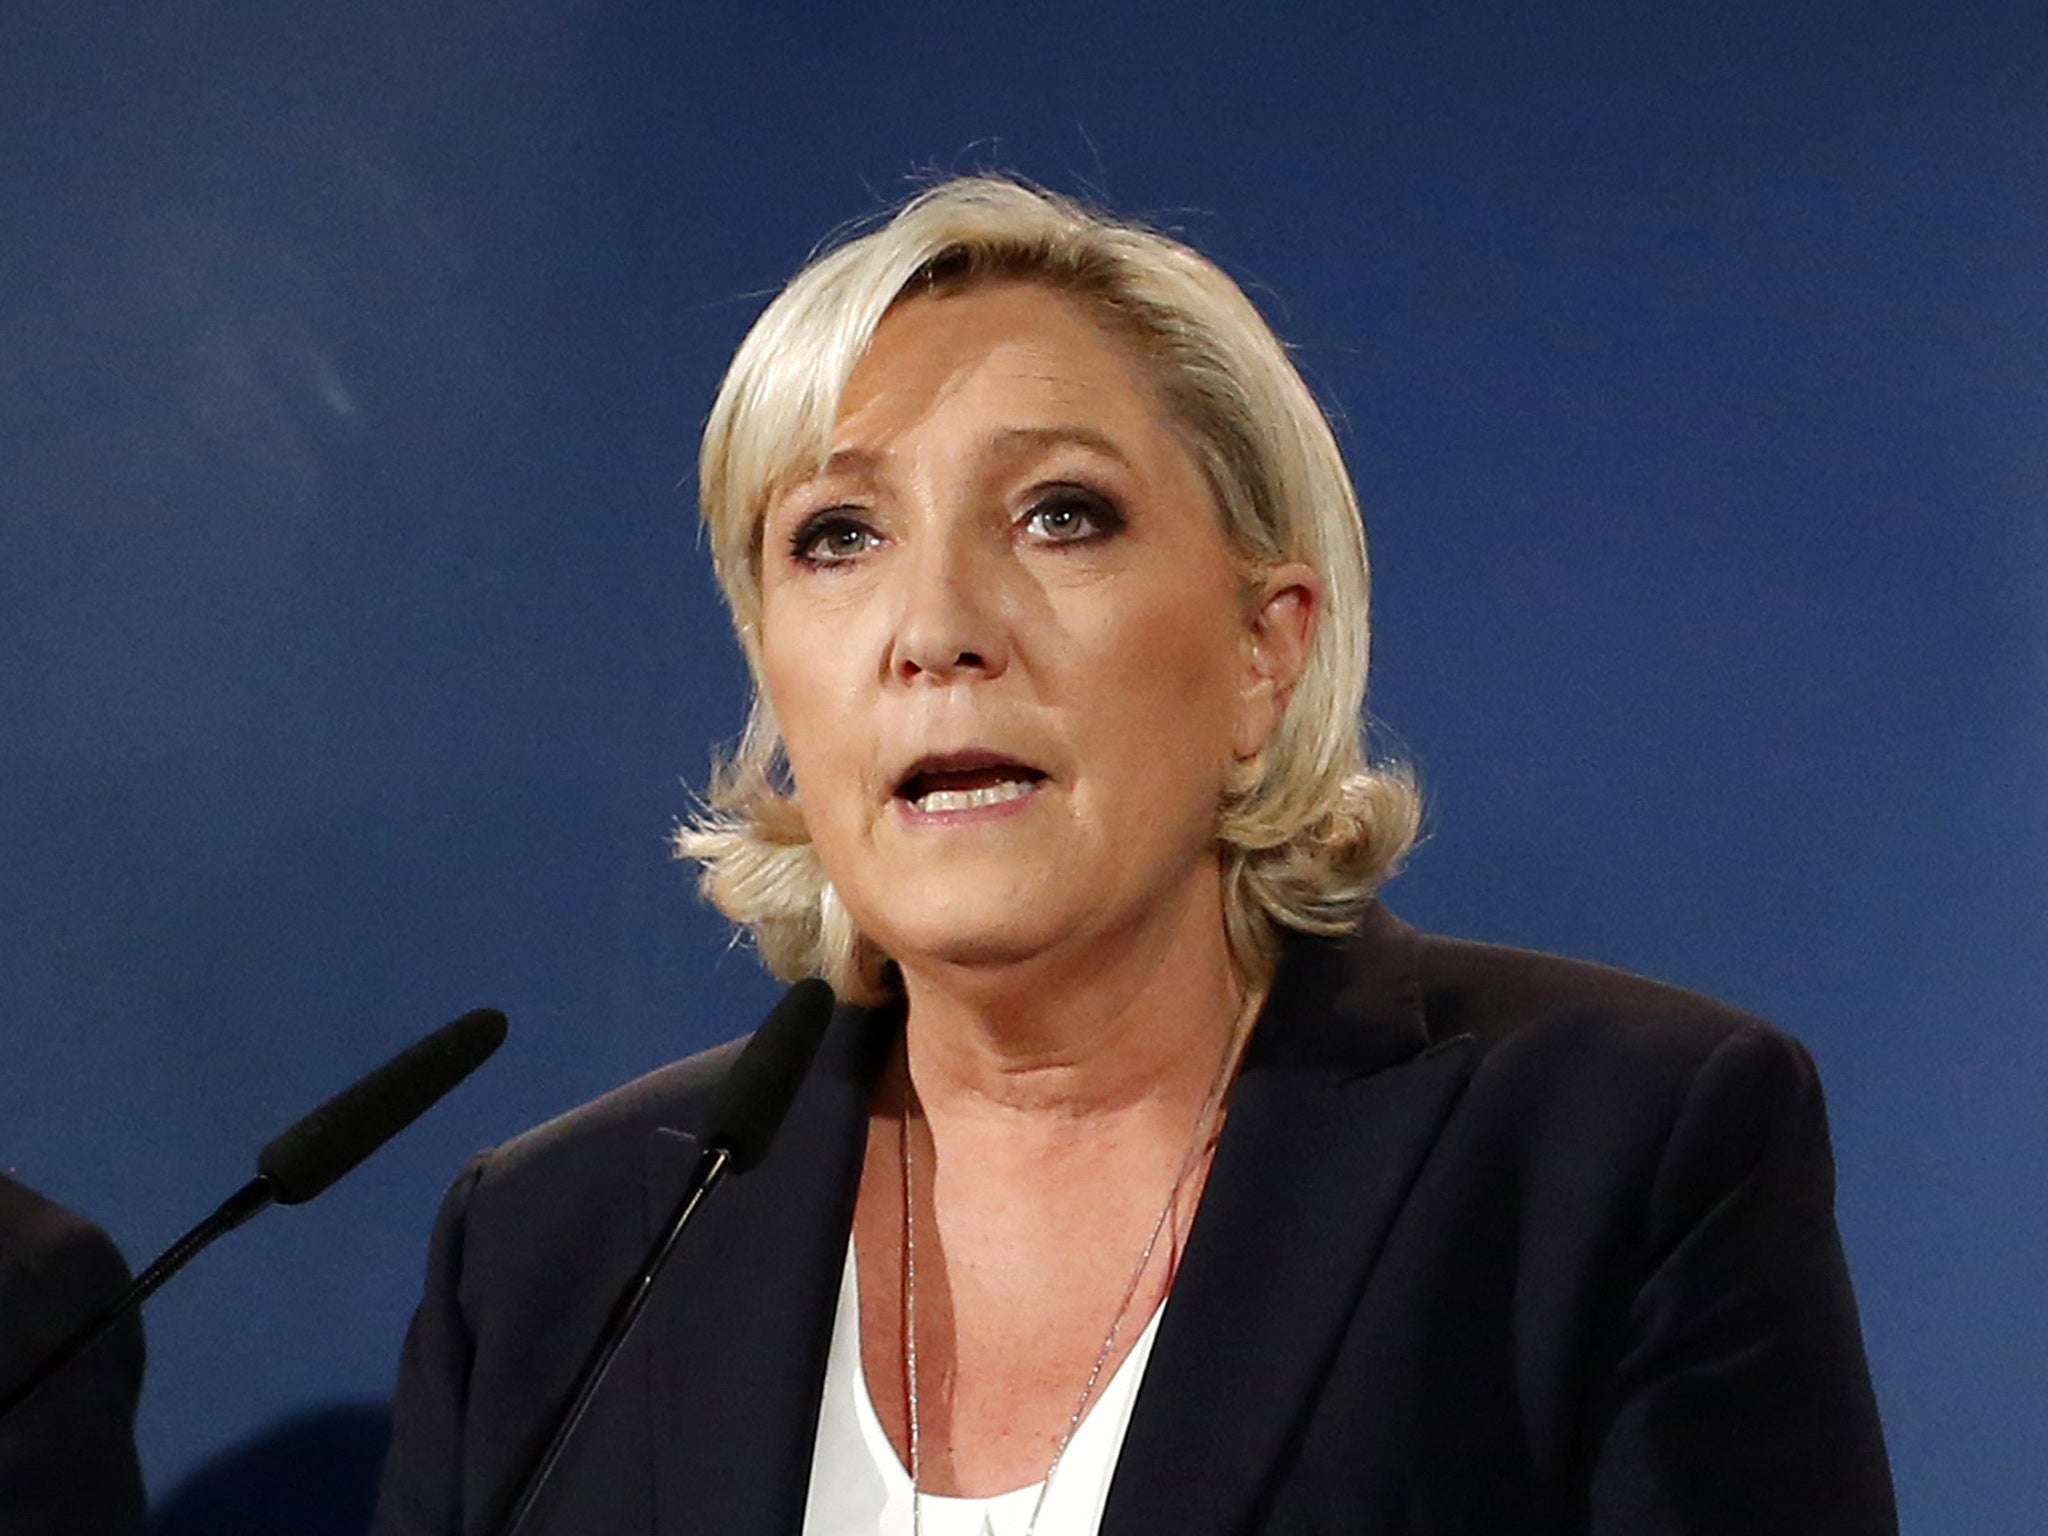 Marine Le Pen has called for political support from other parties after bank accounts used by the Front National were closed